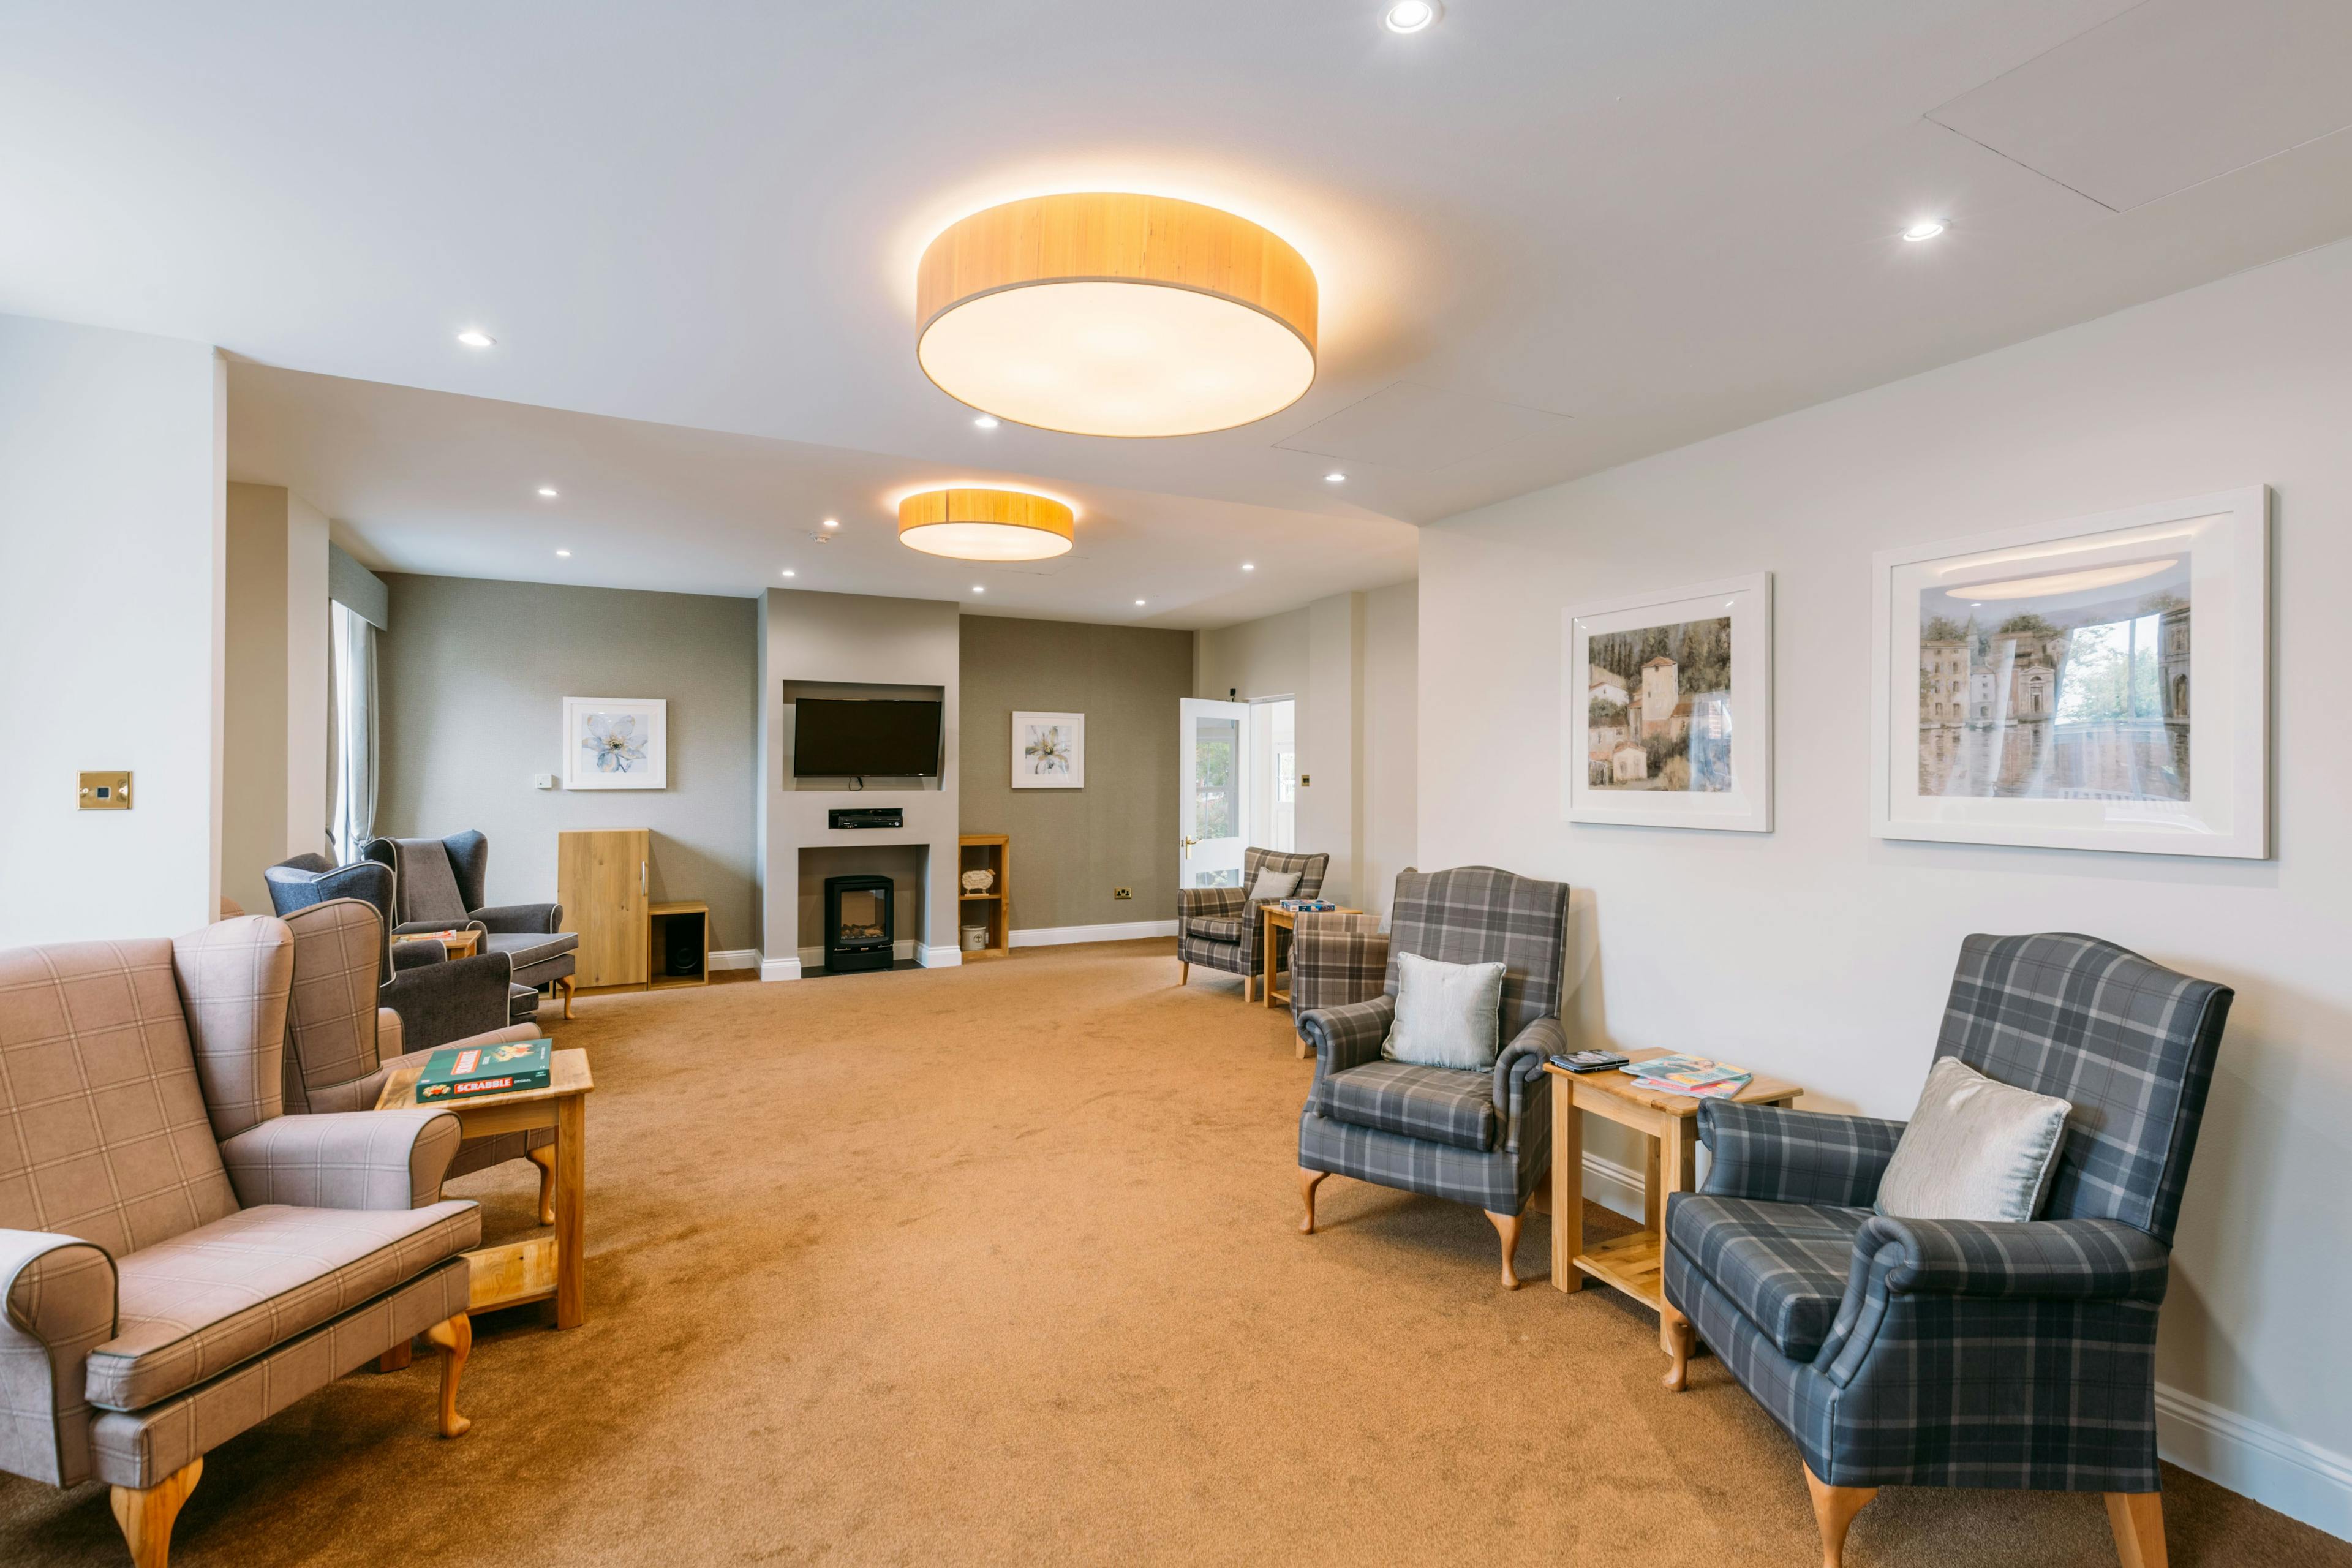 Lounge at St Thomas Care Home in Basingstoke, Hampshire